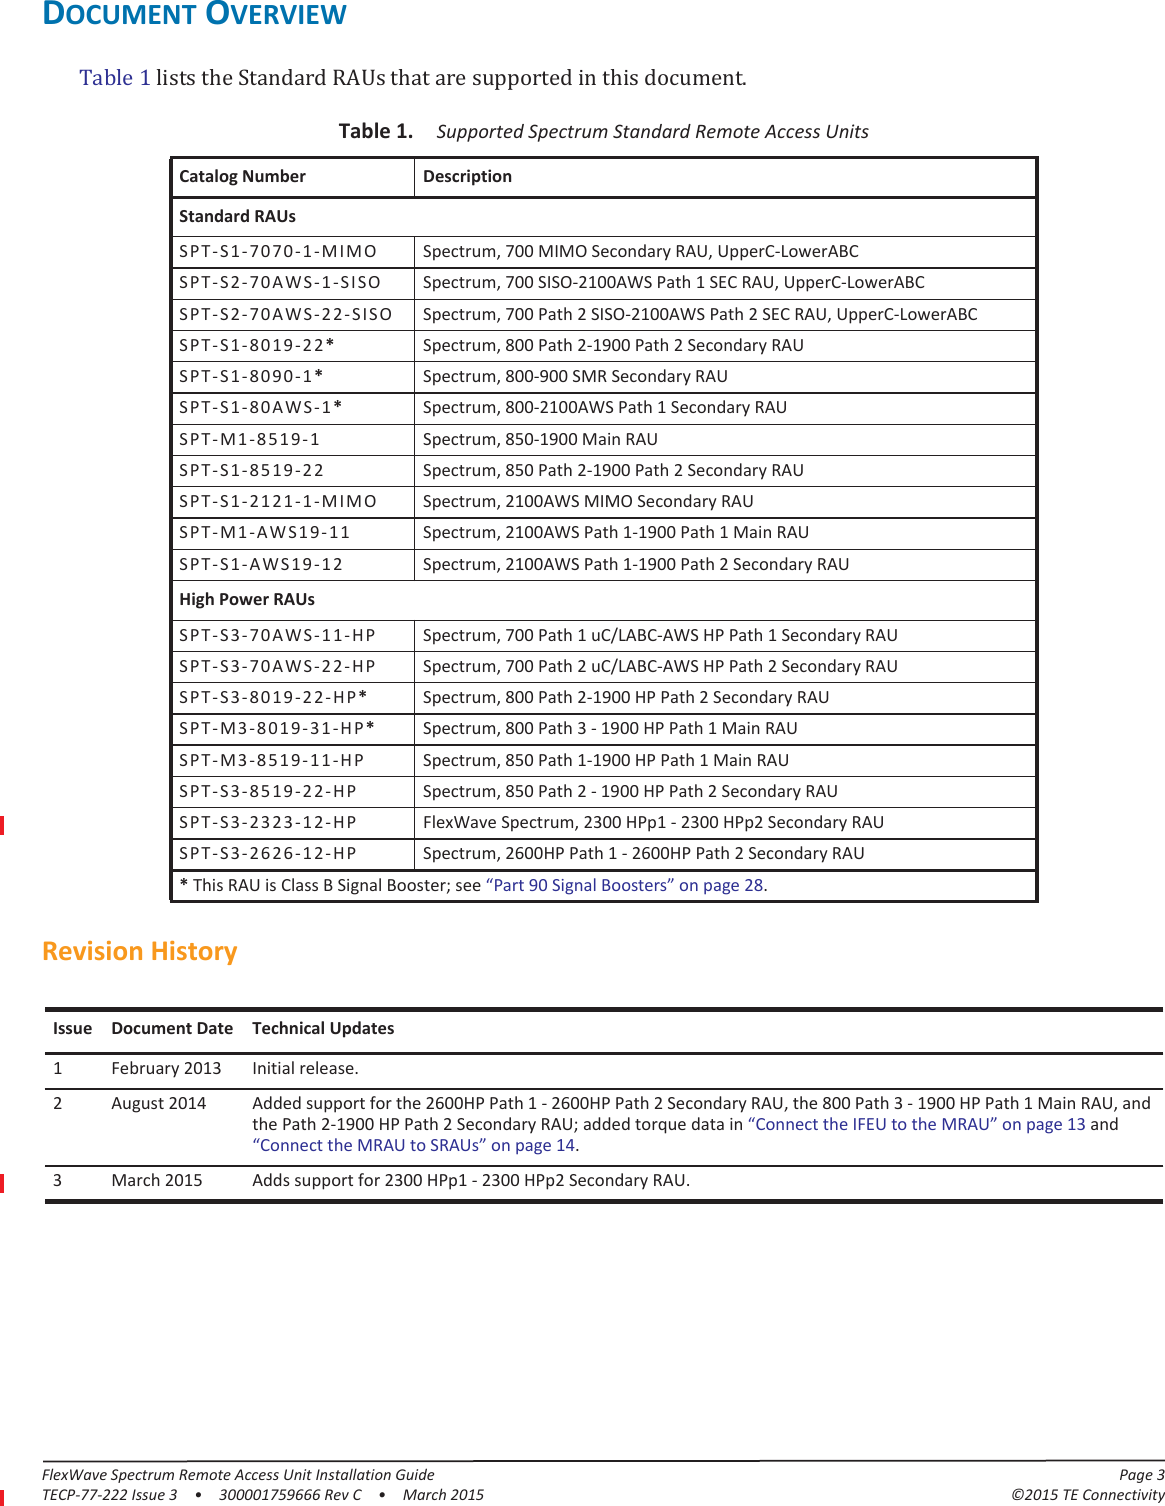 FlexWave Spectrum Remote Access Unit Installation Guide Page 3TECP-77-222 Issue 3  •  300001759666 Rev C  •  March 2015 ©2015 TE ConnectivityDOCUMENT OVERVIEWTable 1 lists the Standard RAUs that are supported in this document.Table 1.  Supported Spectrum Standard Remote Access UnitsCatalog Number  DescriptionStandard RAUsSpectrum, 700 MIMO Secondary RAU, UpperC-LowerABC Spectrum, 700 SISO-2100AWS Path 1 SEC RAU, UpperC-LowerABCSpectrum, 700 Path 2 SISO-2100AWS Path 2 SEC RAU, UpperC-LowerABCSpectrum, 800 Path 2-1900 Path 2 Secondary RAUSpectrum, 800-900 SMR Secondary RAUSpectrum, 800-2100AWS Path 1 Secondary RAUSpectrum, 850-1900 Main RAUSpectrum, 850 Path 2-1900 Path 2 Secondary RAUSpectrum, 2100AWS MIMO Secondary RAUSpectrum, 2100AWS Path 1-1900 Path 1 Main RAU Spectrum, 2100AWS Path 1-1900 Path 2 Secondary RAU High Power RAUsSpectrum, 700 Path 1 uC/LABC-AWS HP Path 1 Secondary RAUSpectrum, 700 Path 2 uC/LABC-AWS HP Path 2 Secondary RAUSpectrum, 800 Path 2-1900 HP Path 2 Secondary RAUSpectrum, 800 Path 3 - 1900 HP Path 1 Main RAUSpectrum, 850 Path 1-1900 HP Path 1 Main RAUSpectrum, 850 Path 2 - 1900 HP Path 2 Secondary RAUFlexWave Spectrum, 2300 HPp1 - 2300 HPp2 Secondary RAUSpectrum, 2600HP Path 1 - 2600HP Path 2 Secondary RAU* This RAU is Class B Signal Booster; see “Part 90 Signal Boosters” on page  28.Revision HistoryIssue Document Date Technical Updates1 February 2013 Initial release.2 August 2014 Added support for the 2600HP Path 1 - 2600HP Path 2 Secondary RAU, the 800 Path 3 - 1900 HP Path 1 Main RAU, and the Path 2-1900 HP Path 2 Secondary RAU; added torque data in “Connect the IFEU to the MRAU” on page  13 and “Connect the MRAU to SRAUs” on page  14.3 March 2015 Adds support for 2300 HPp1 - 2300 HPp2 Secondary RAU.SPT-S1-7070-1-MIMOSPT-S2-70AWS-1-SISOSPT-S2-70AWS-22-SISOSPT-S1-8019-22*SPT-S1-8090-1*SPT-S1-80AWS-1*SPT-M1-8519-1SPT-S1-8519-22SPT-S1-2121-1-MIMOSPT-M1-AWS19-11SPT-S1-AWS19-12SPT-S3-70AWS-11-HPSPT-S3-70AWS-22-HPSPT-S3-8019-22-HP*SPT-M3-8019-31-HP*SPT-M3-8519-11-HPSPT-S3-8519-22-HPSPT-S3-2323-12-HPSPT-S3-2626-12-HP